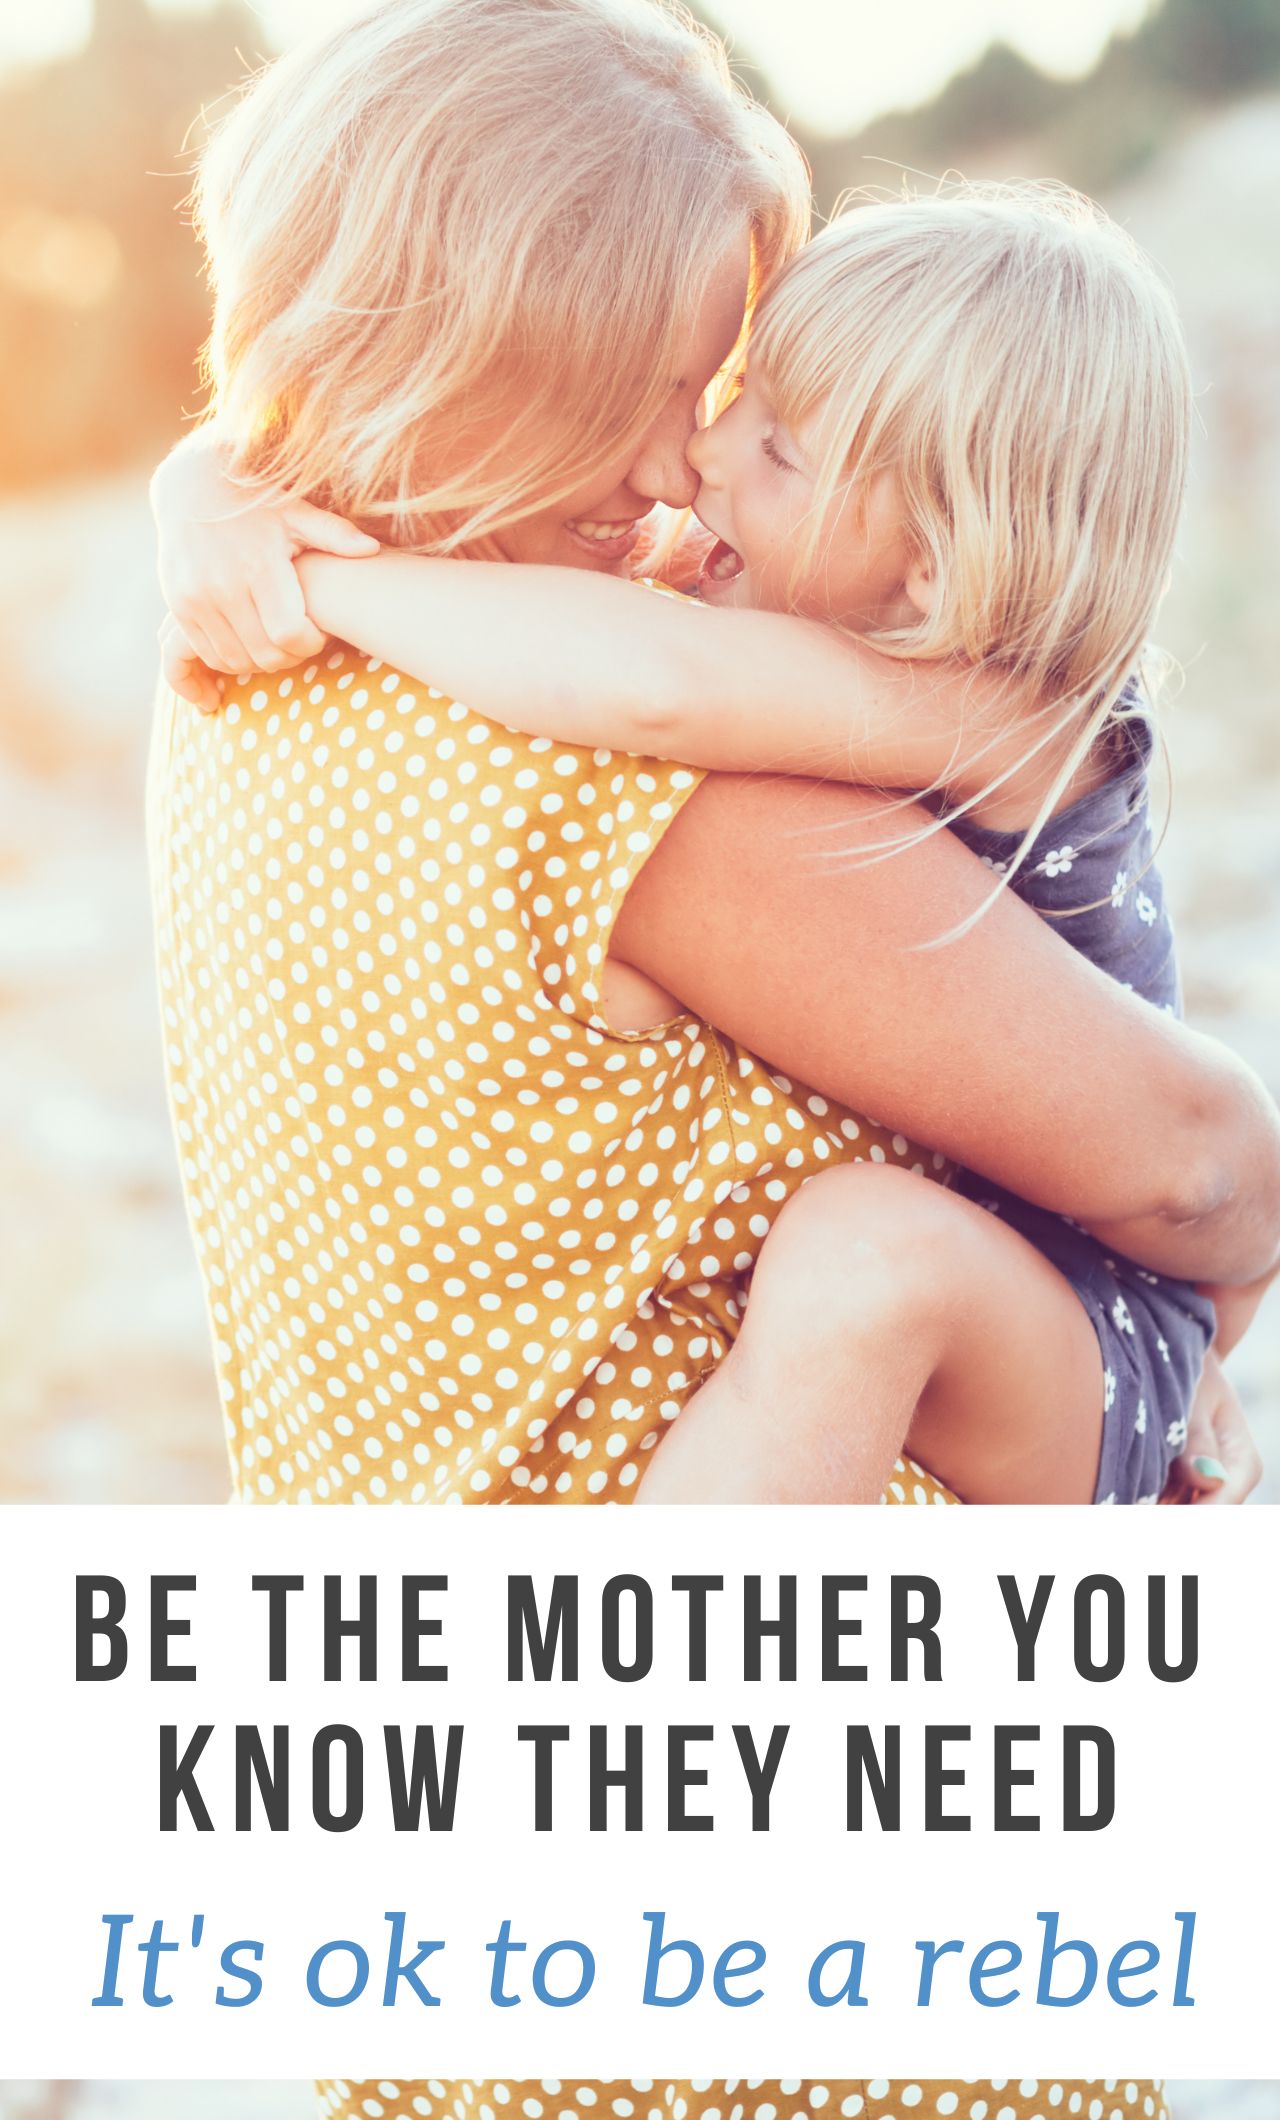 Be A Rebel in motherhood - choose your path